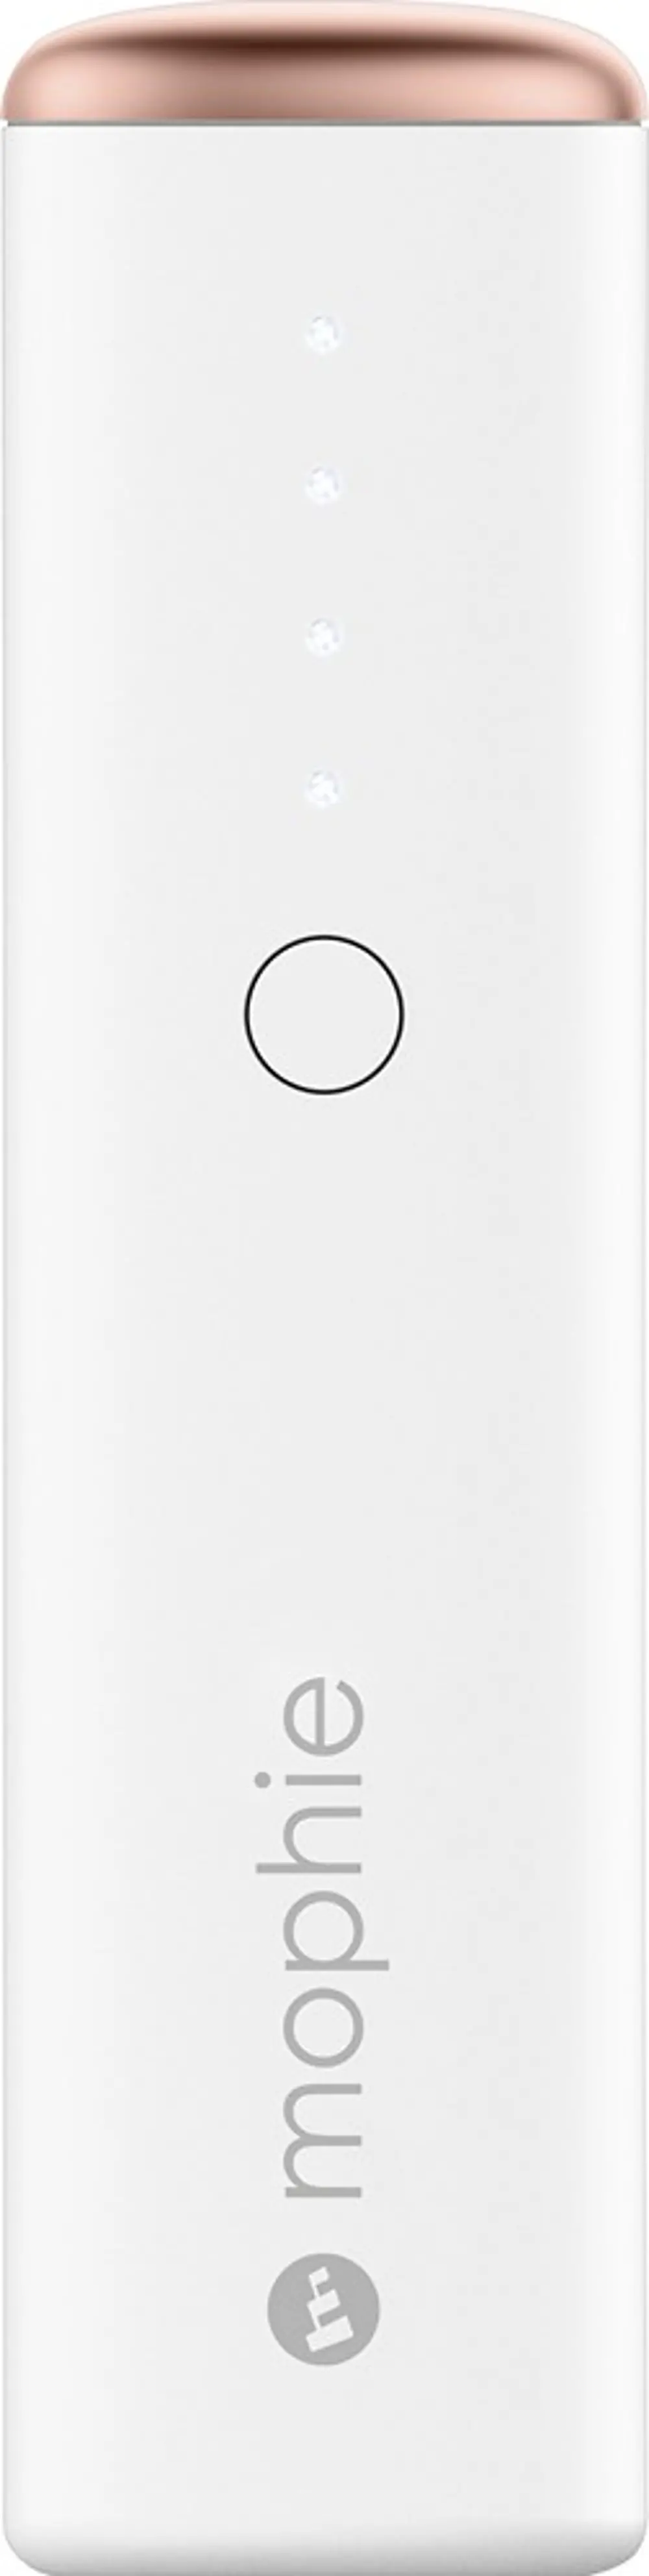 3421_PWR-RESERVE-2.6K-WRGLD Mophie Power Reserve 1X (2,600mAh) - Rose Gold-1